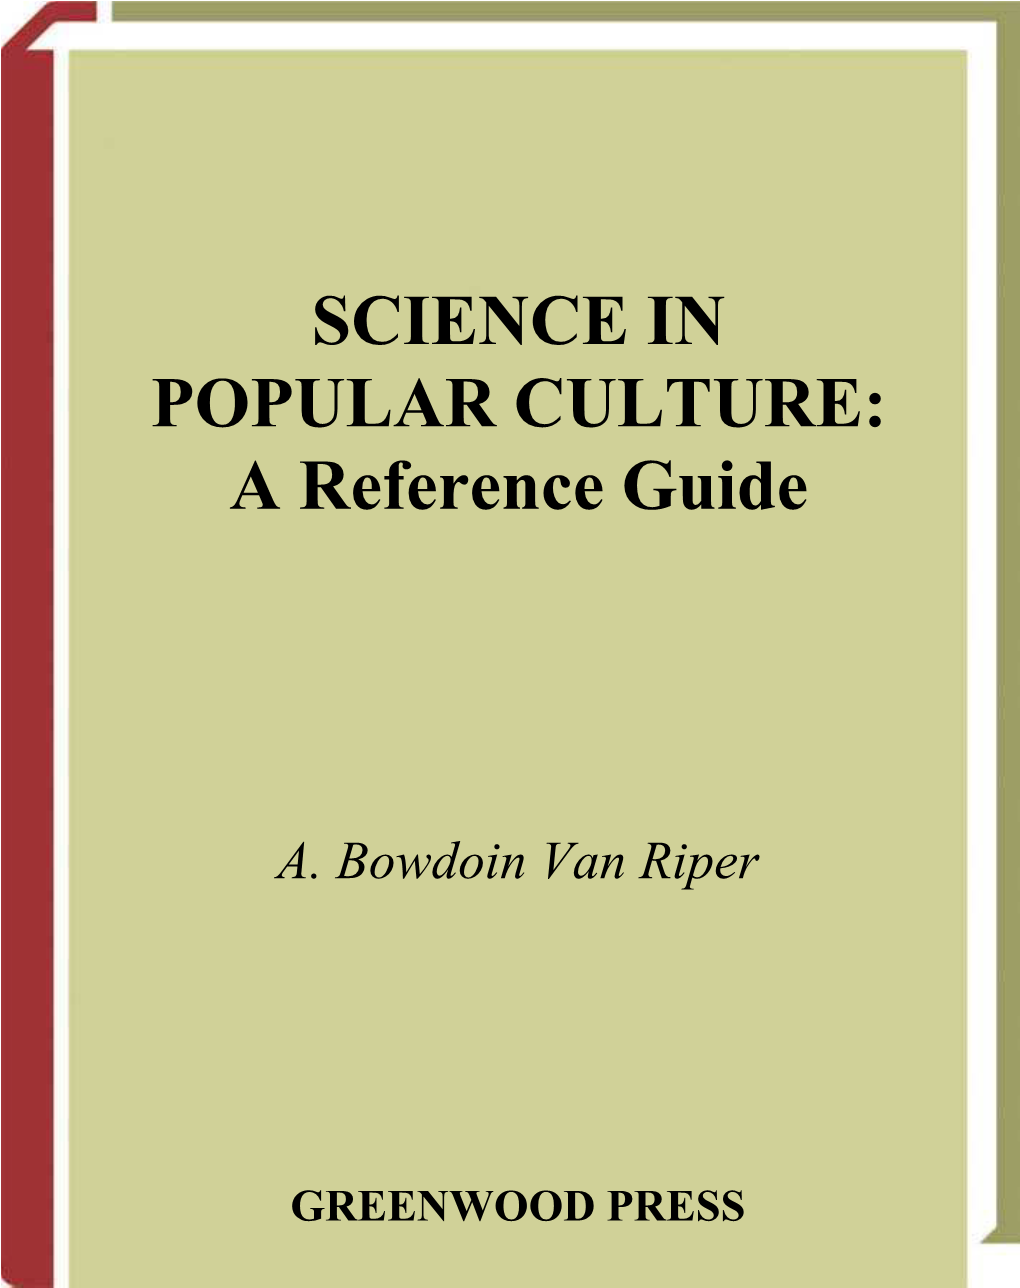 SCIENCE in POPULAR CULTURE: a Reference Guide